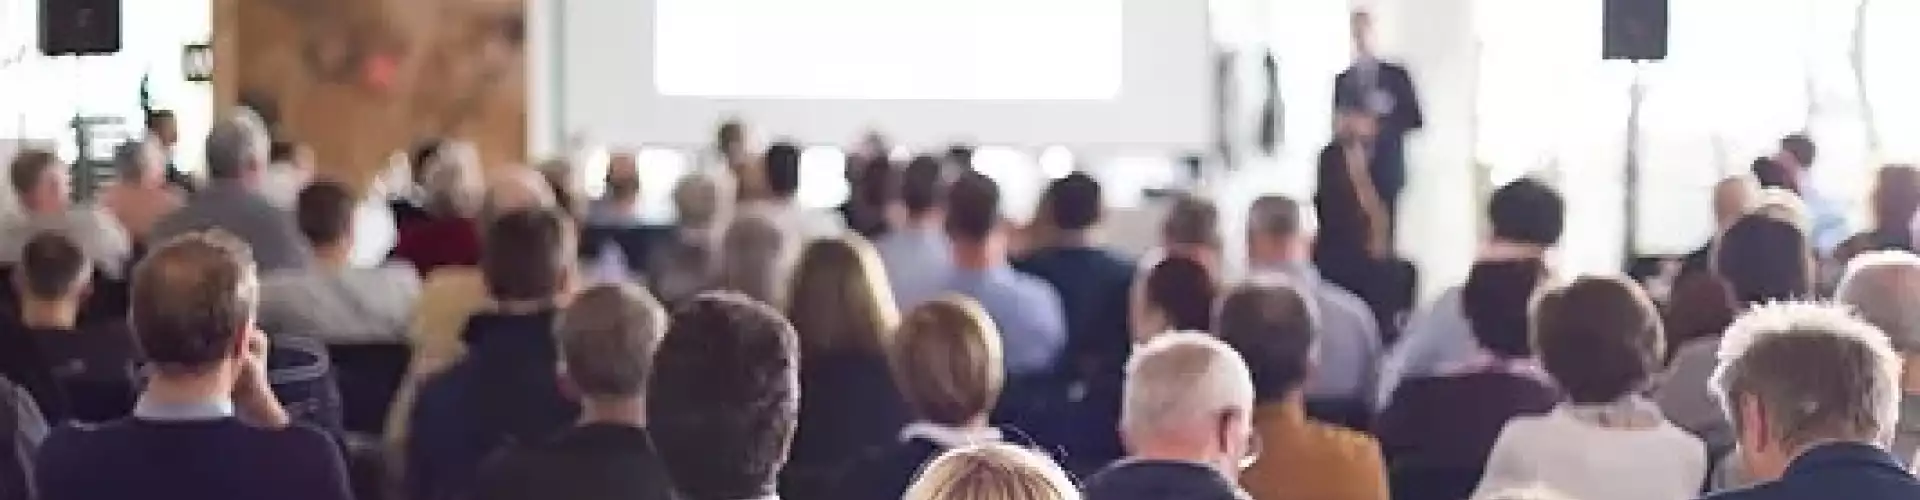 Free Training:Learn the #1 Secret to Sold Out Events and Programs